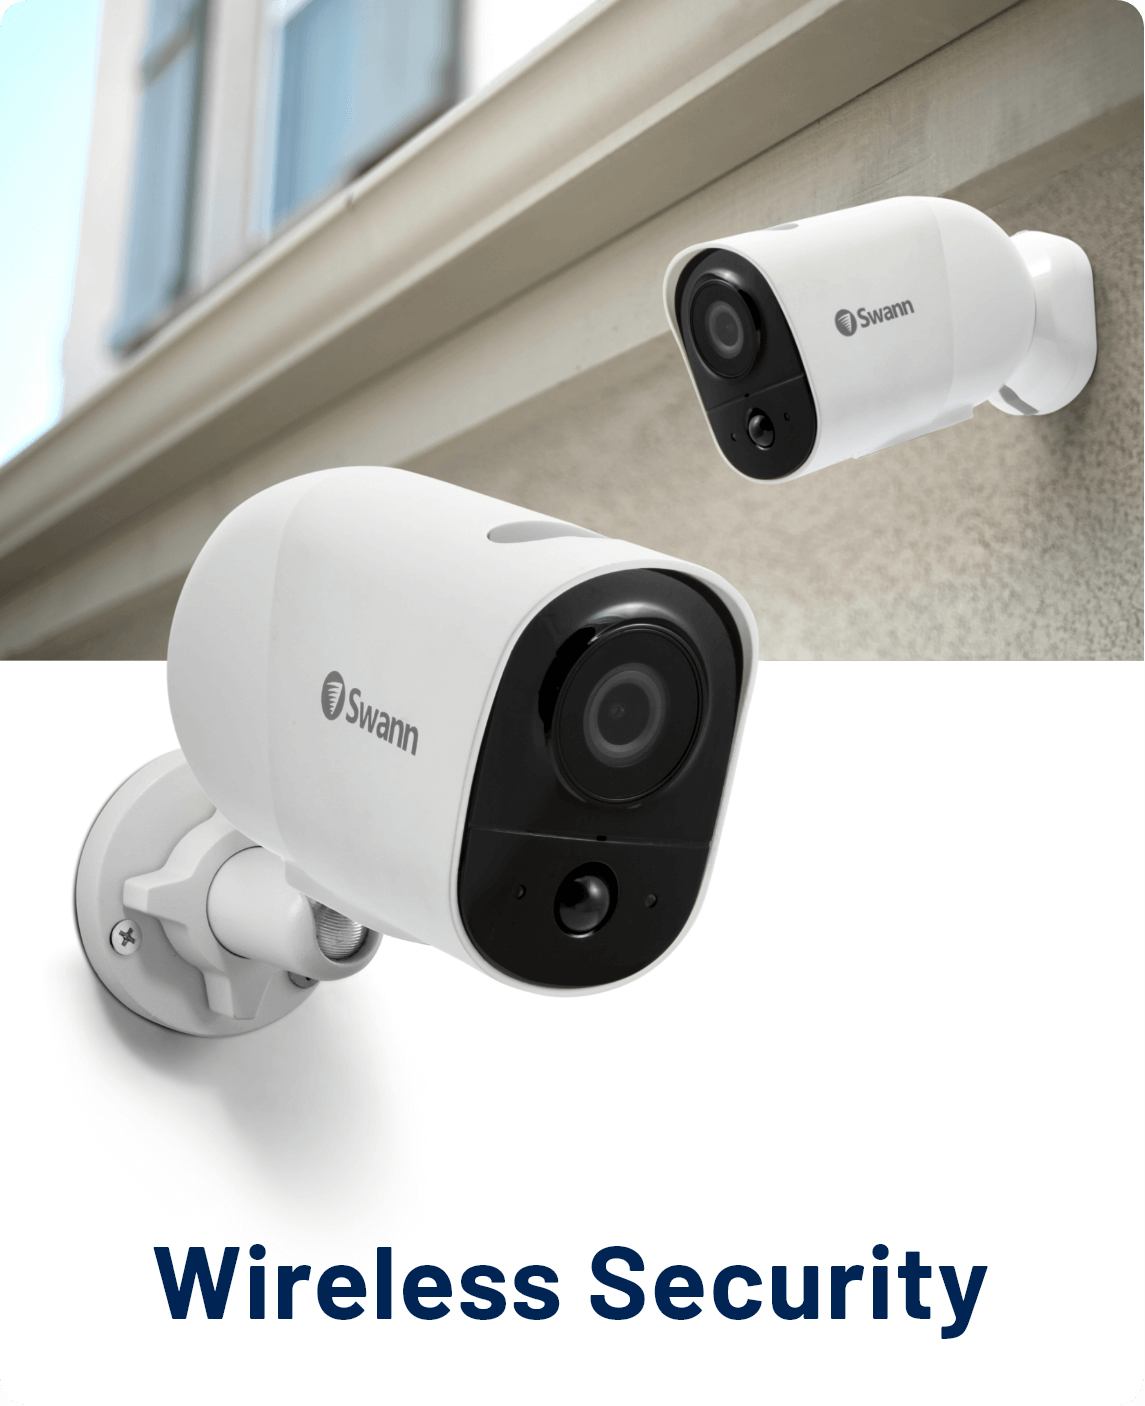 Security Cameras & Surveillance Systems for Home & Business | Swann